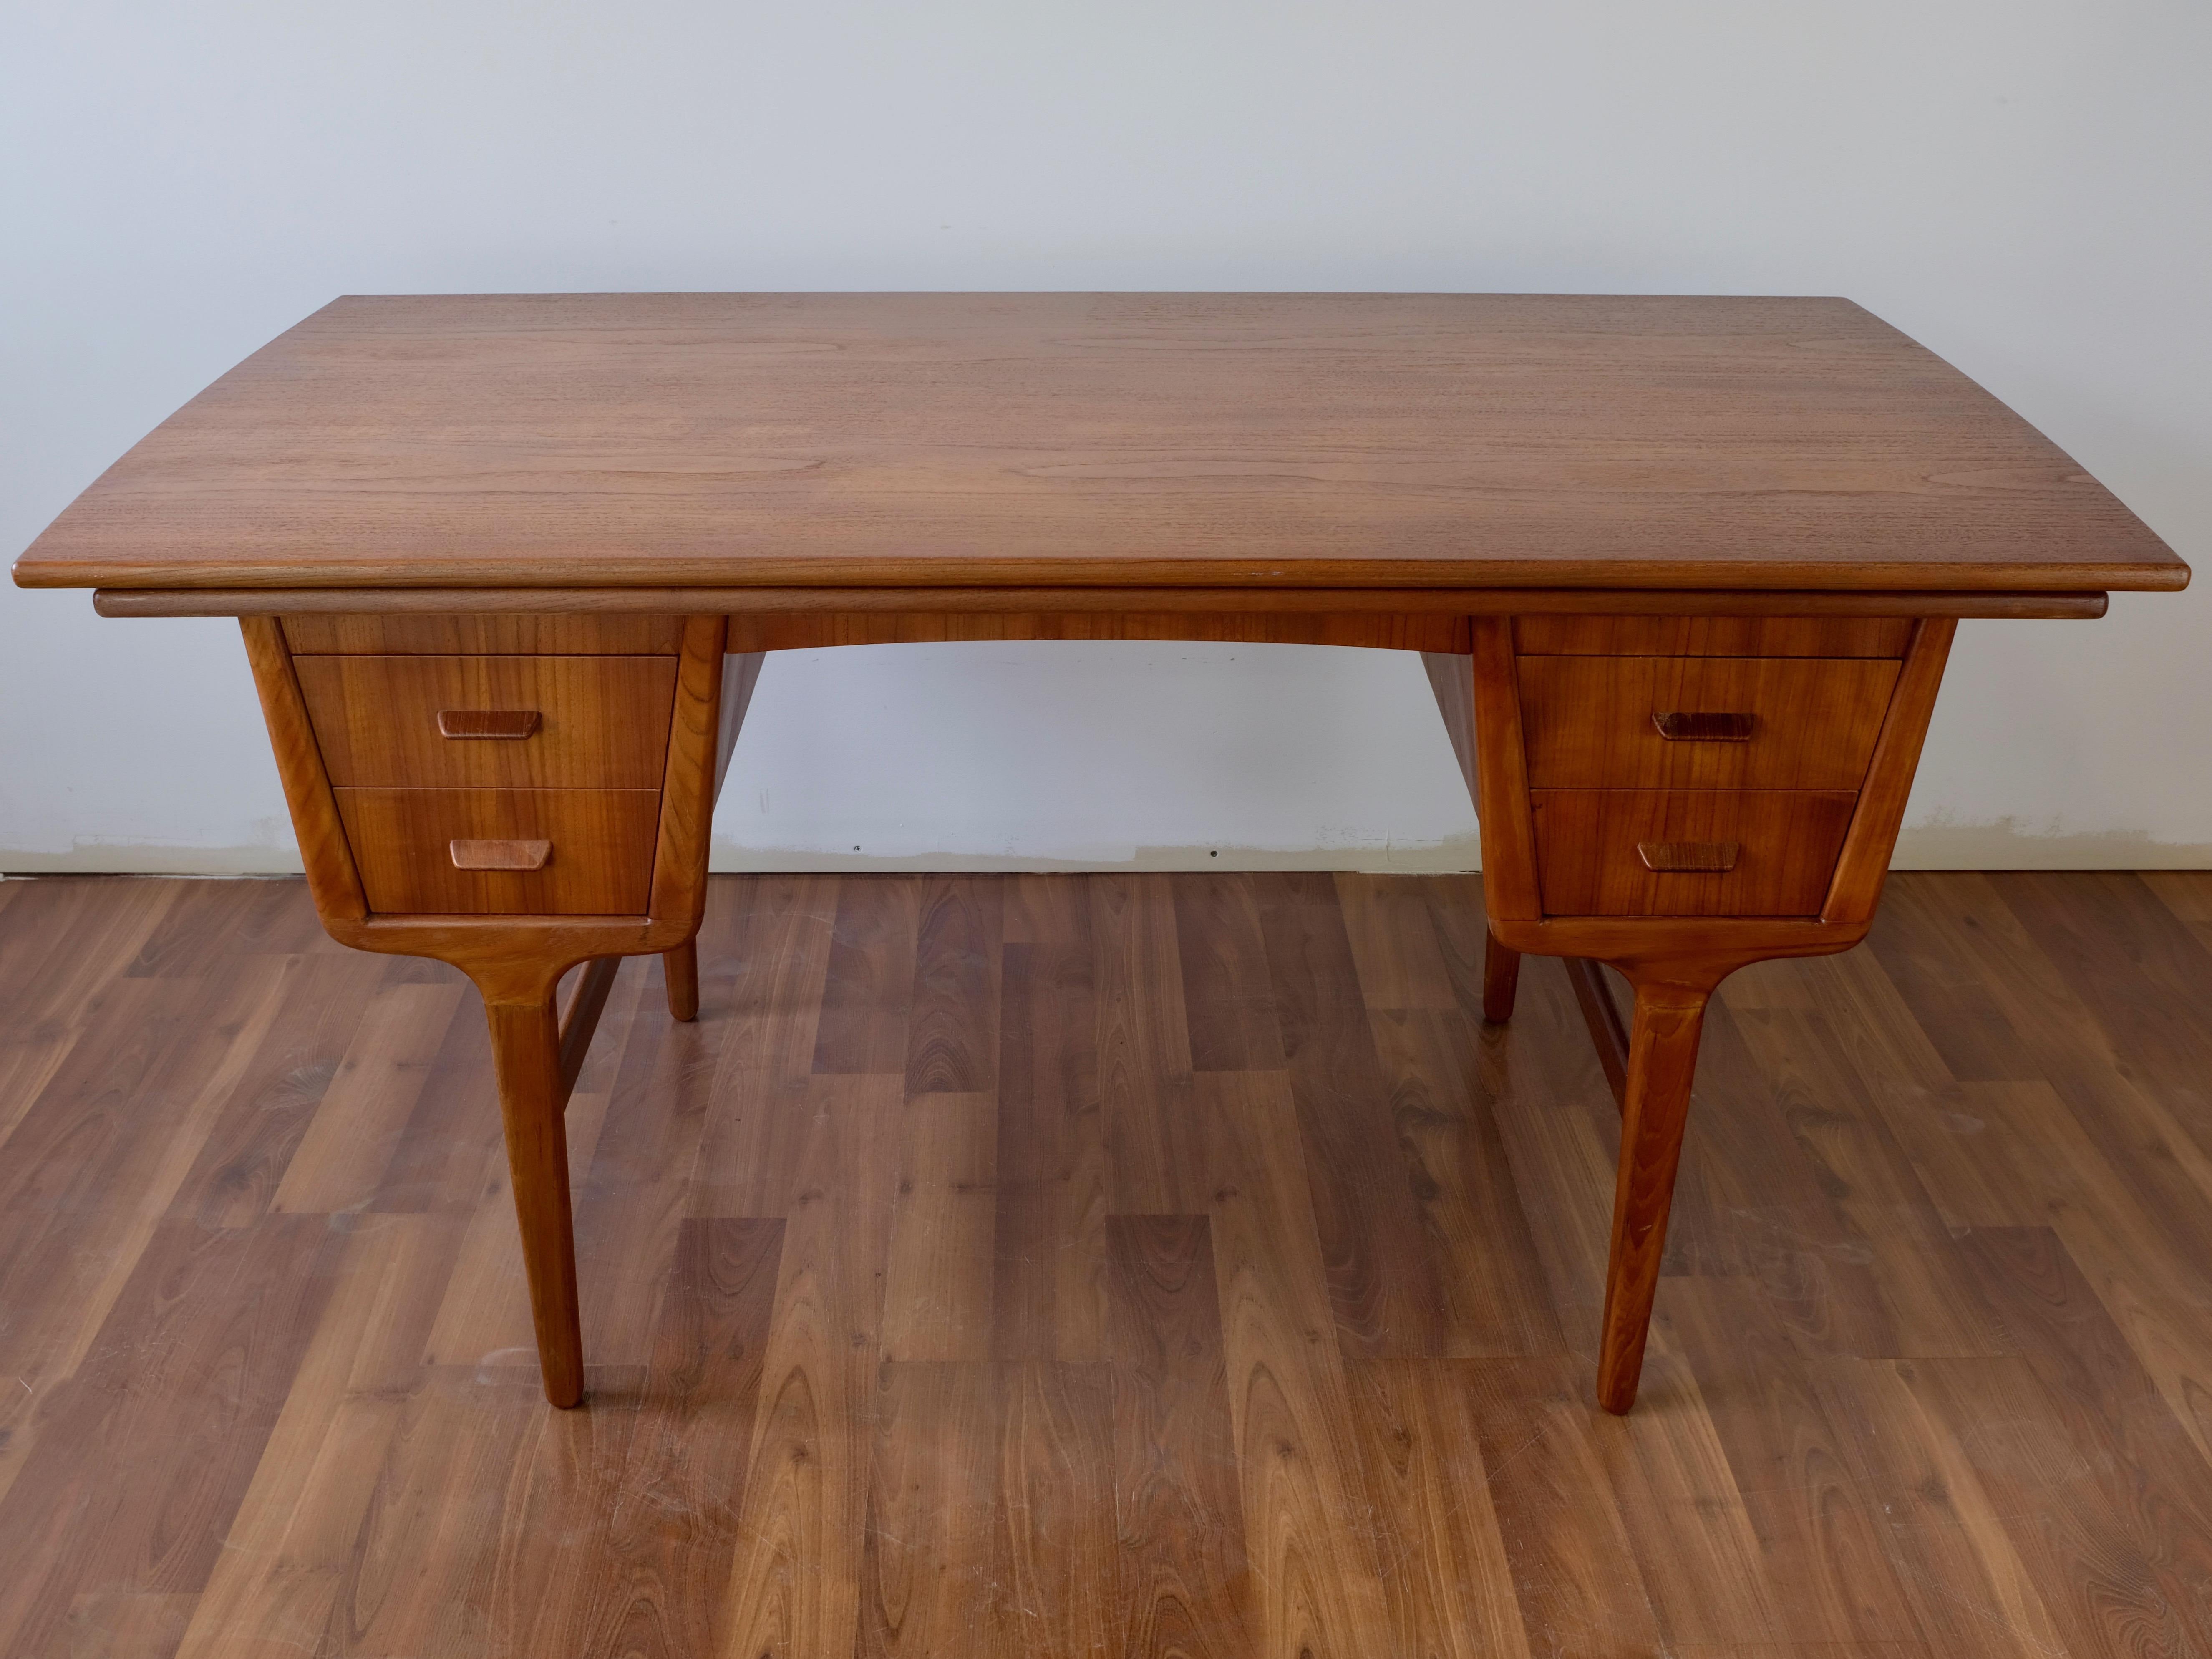 Double sided teak desk designed by Carl Aage Skov and made in Denmark by Munch Mobelfabrik

The piece has two banks of two drawers on one side, and one tall drawer and open compartment with shelf on the other side. The piece features draw leaves